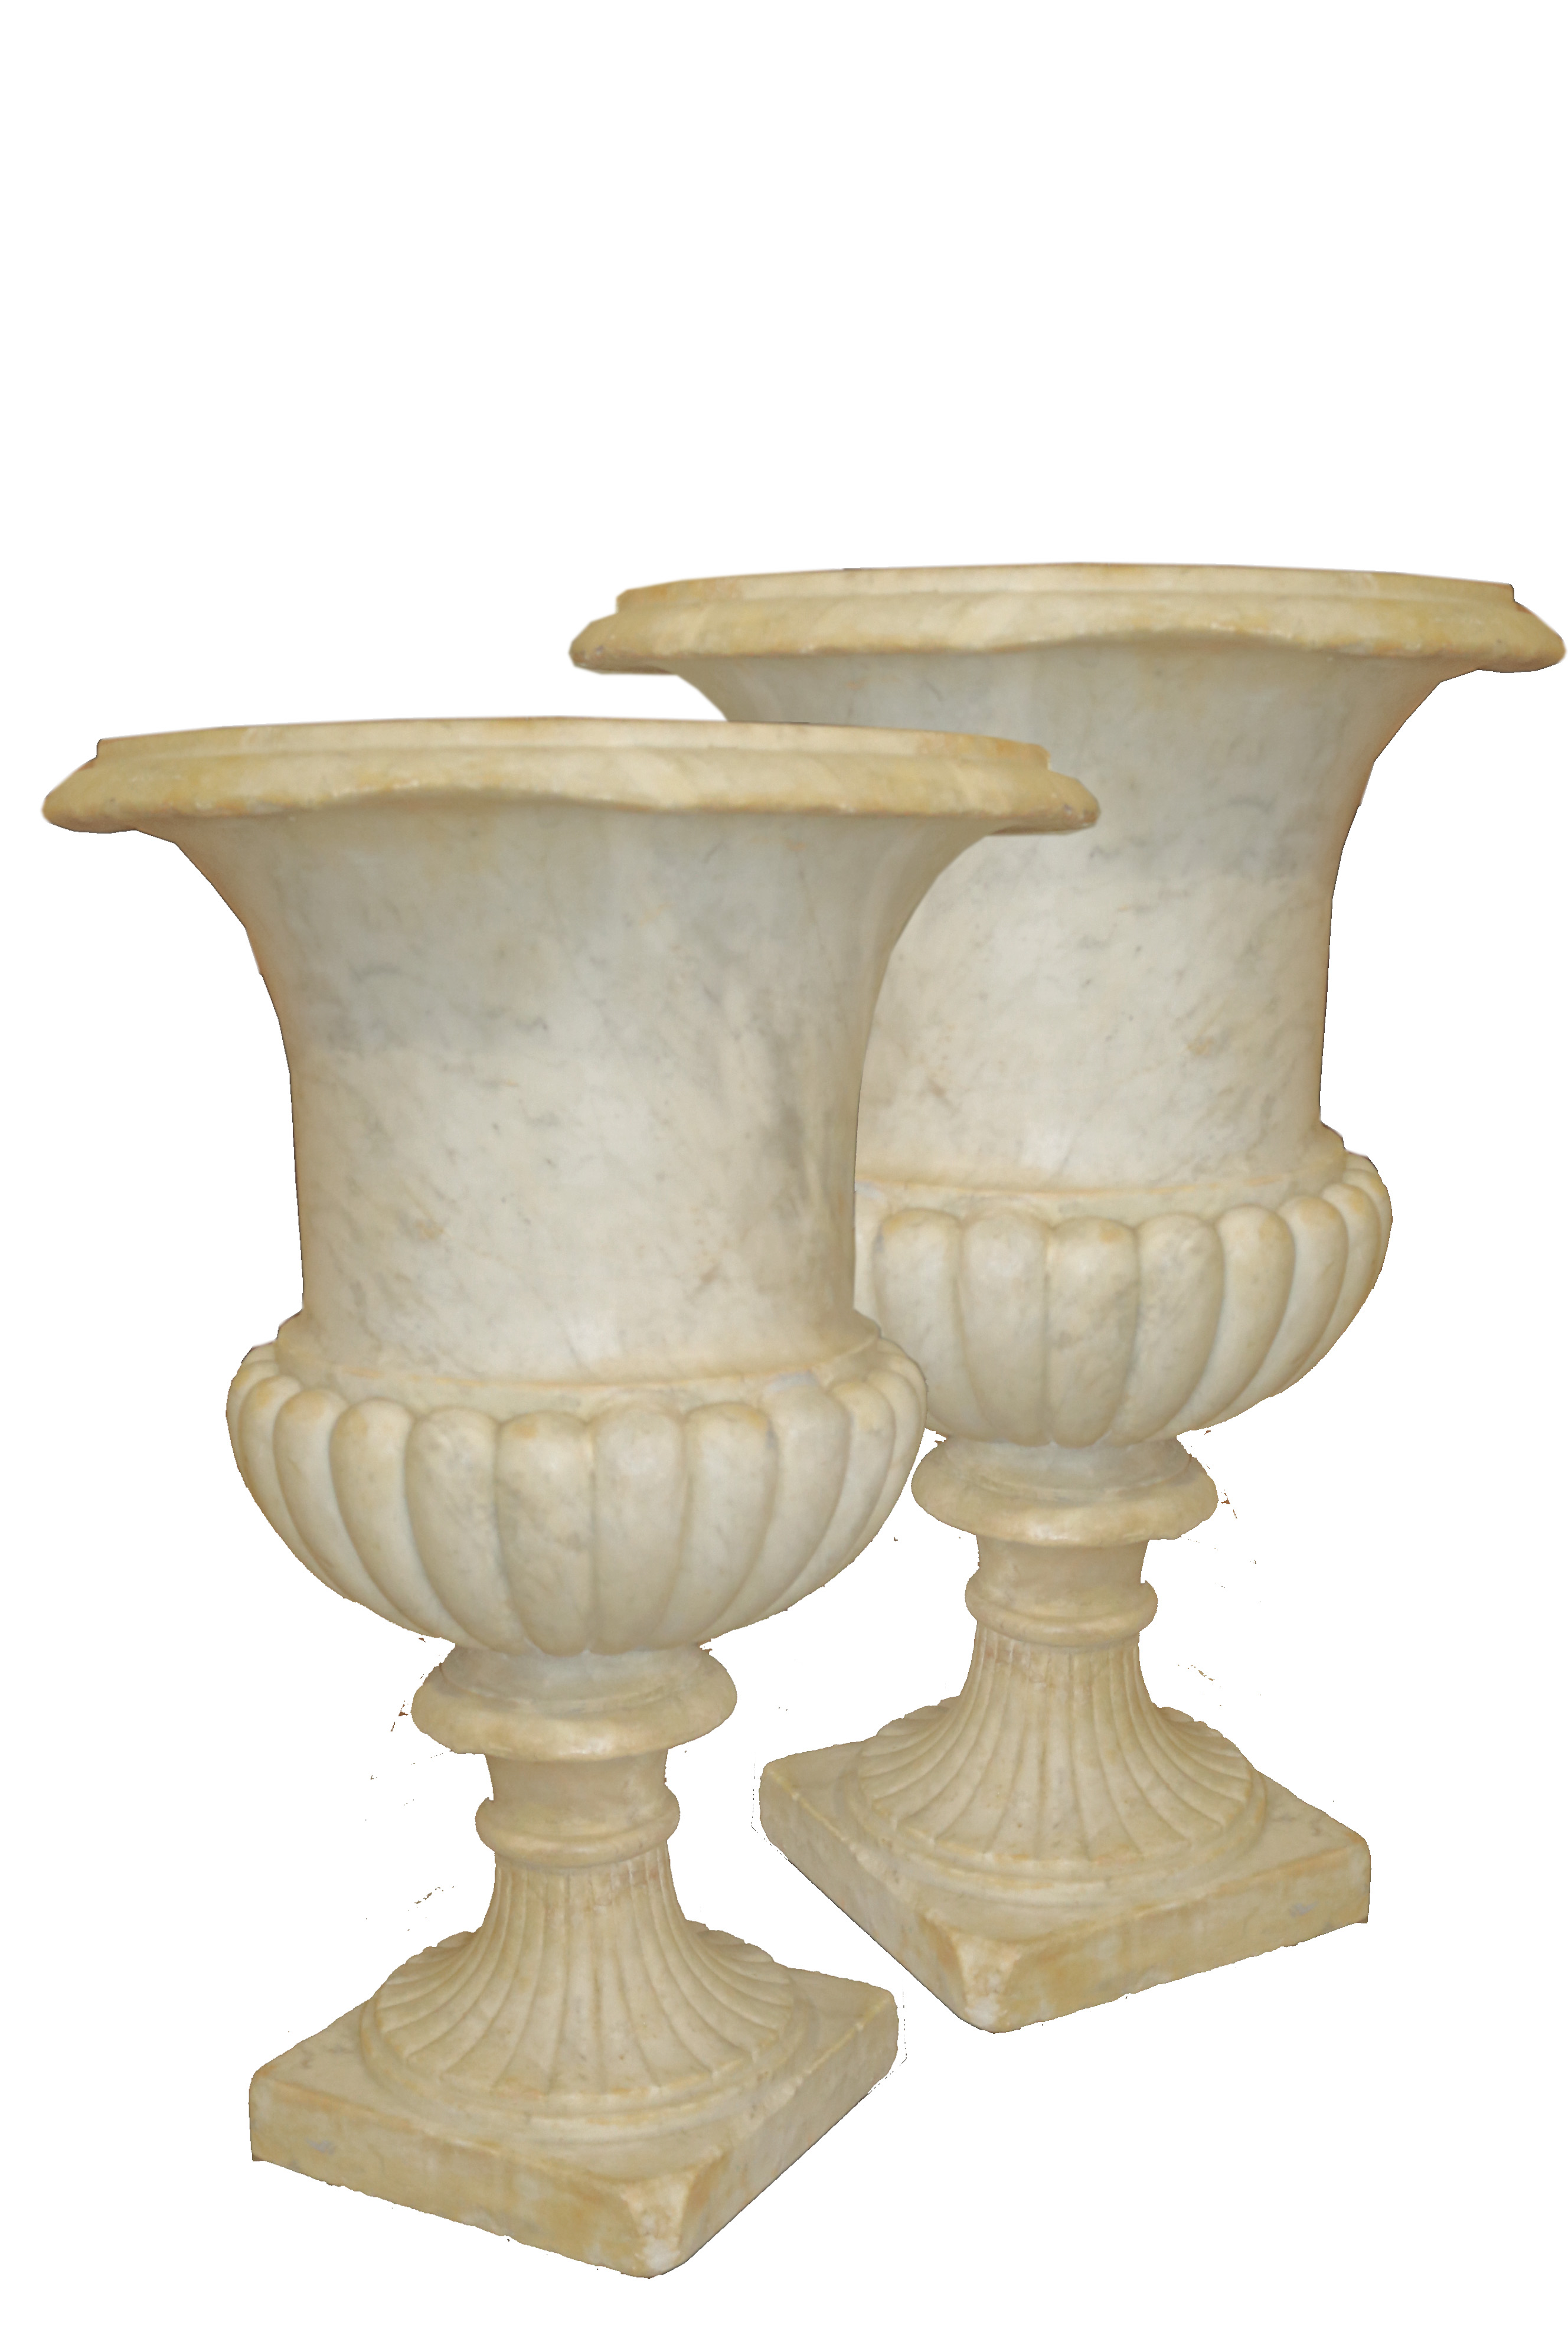 A Pair of Graceful Tulip-Shaped Carrara Marble Urns No. 2923